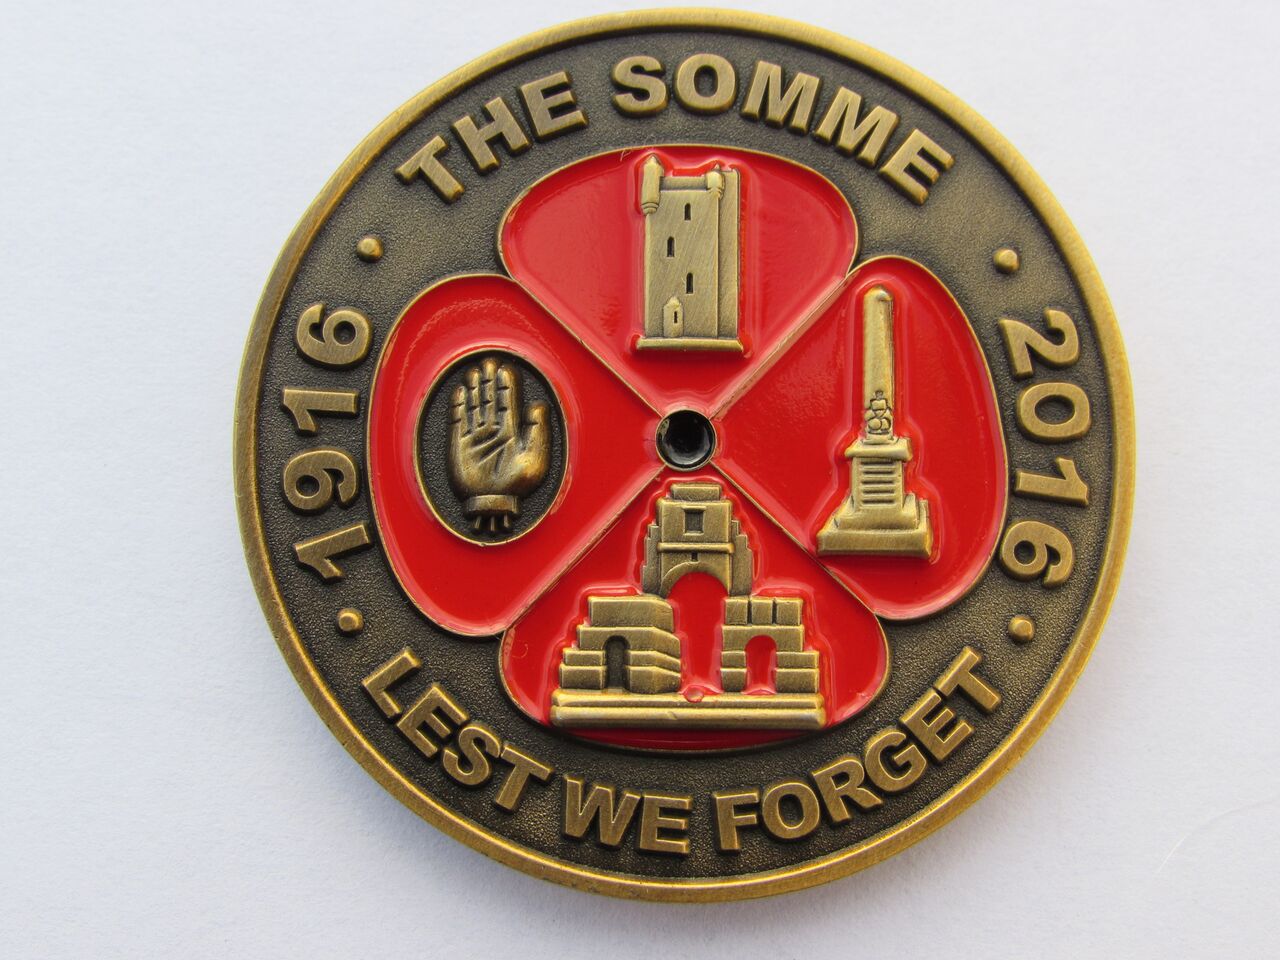 The coin contains images of Somme tributes including the Ulster
 Tower and the Orange Order memorial